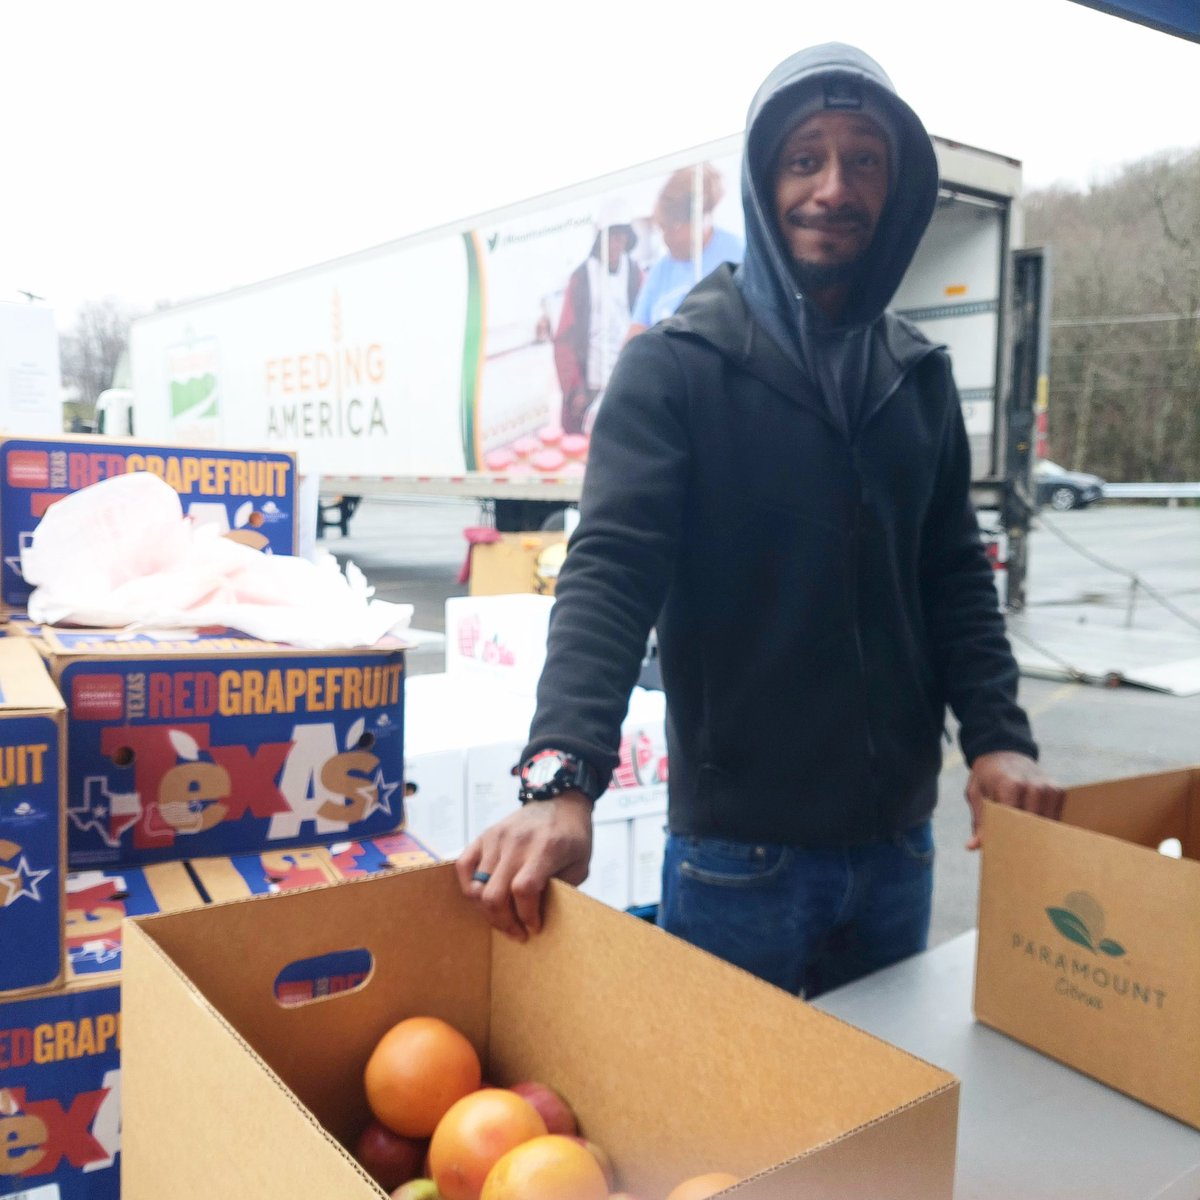 Everyone should have access to the food and resources they need to thrive. Thanks to a grant made possible by the generosity of @CVSHealth we can feed more of our West Virginia neighbors and provide nutritious meals to those who rely on us to fill the gap. Thank you, CVS Health!